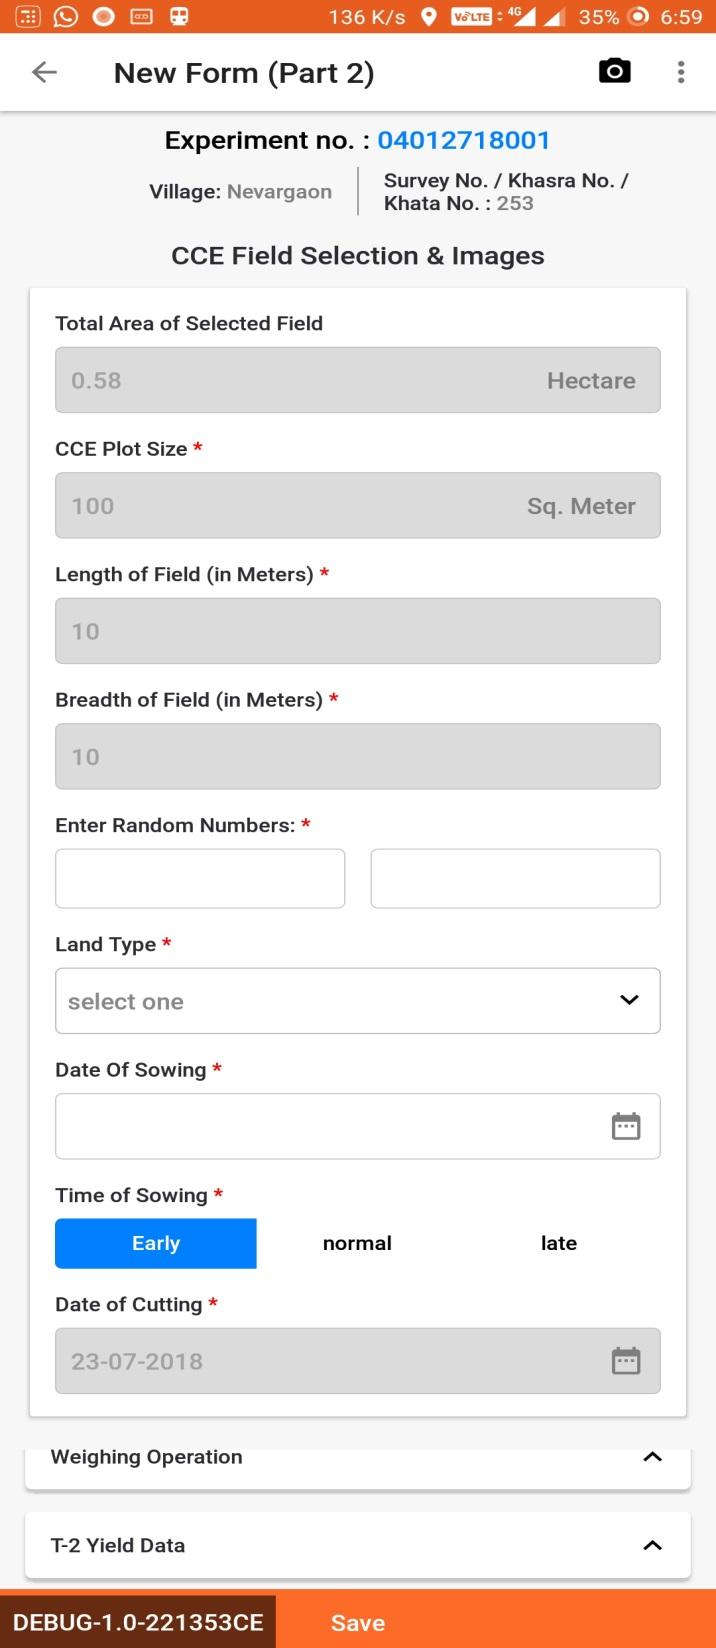 New Form Part 2 Step bystep Step 2 Fill - 1 CCE field Selection and Images The Total Area of Selected Plot is auto filled using the information of the previous form.